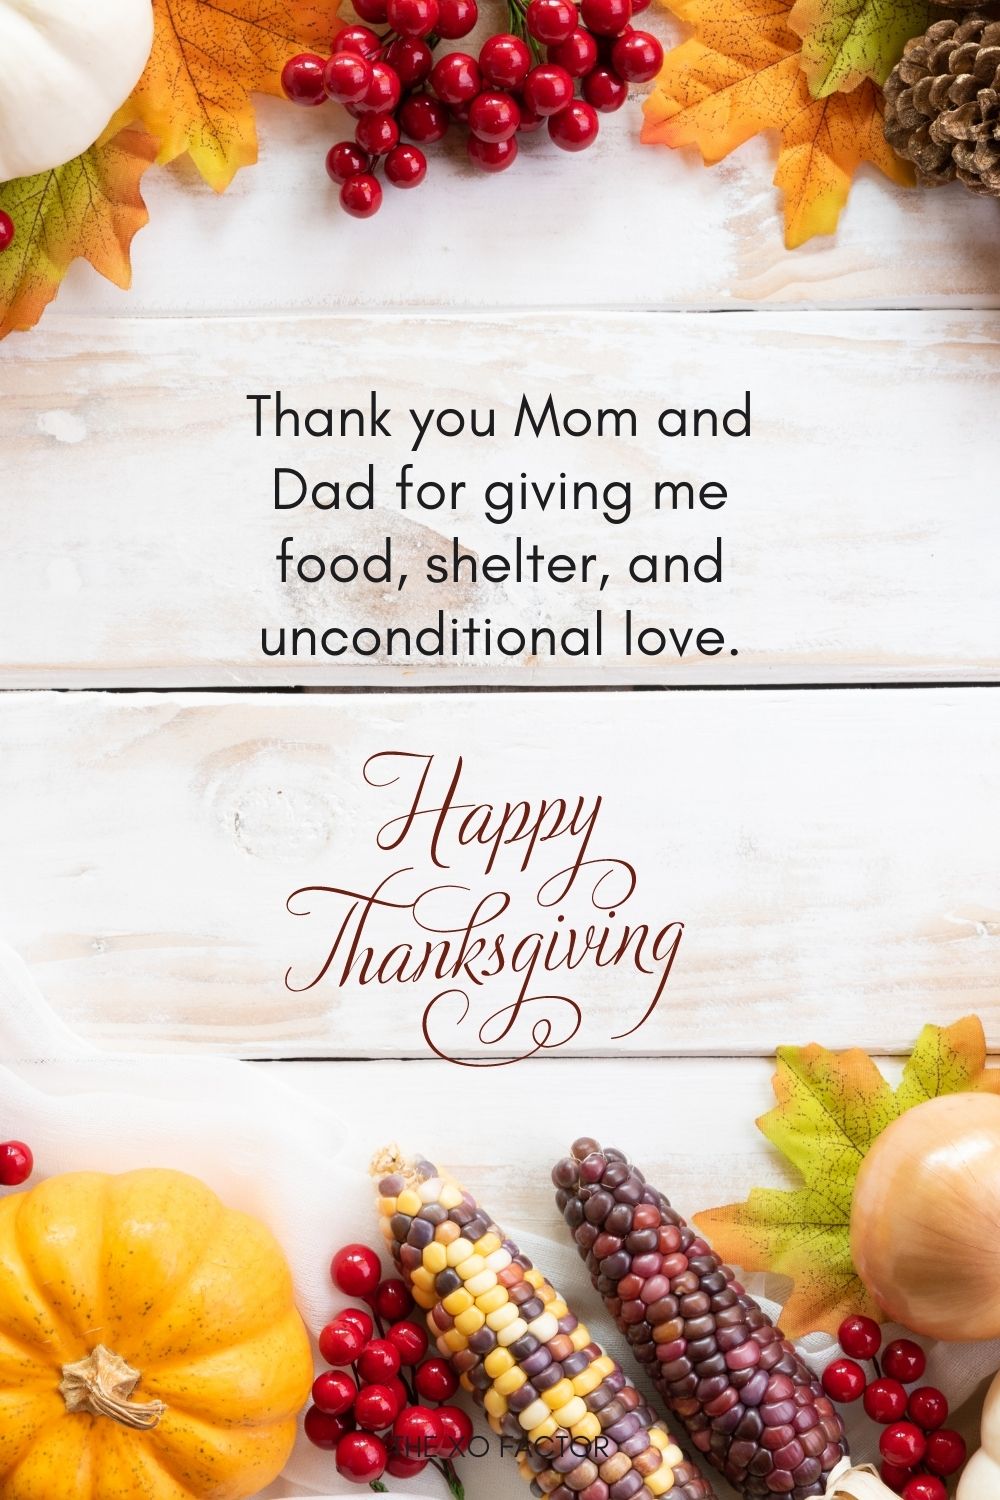 Thank you Mom and Dad for giving me food, shelter, and unconditional love.